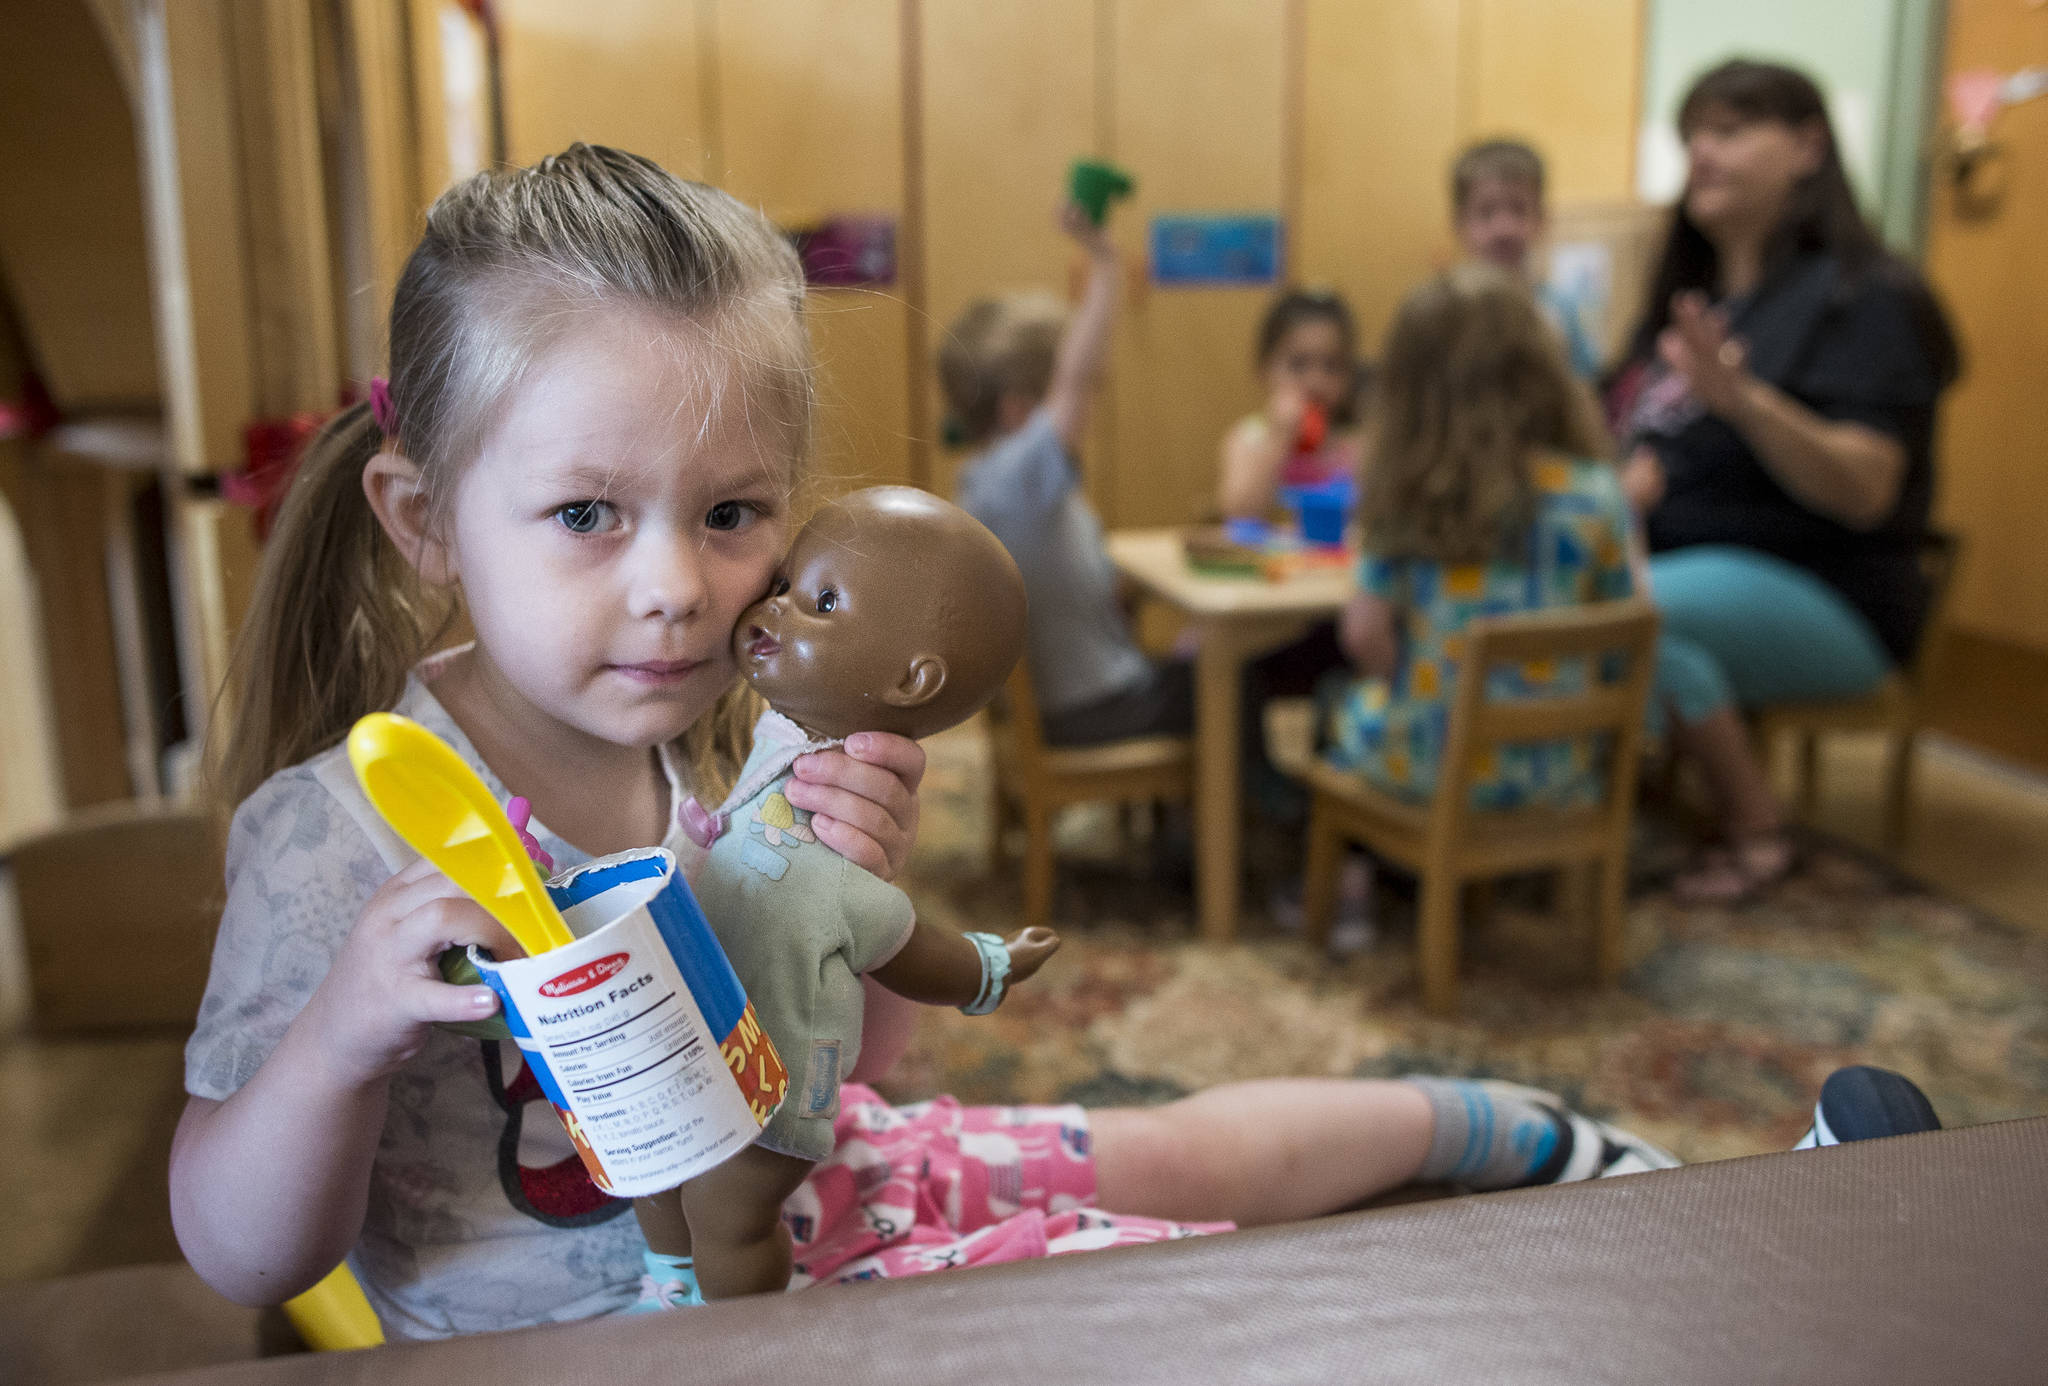 Talia, 3, plays with a doll at Gold Creek Child Development Center on Thursday, May 24, 2018. (Michael Penn | Juneau Empire)